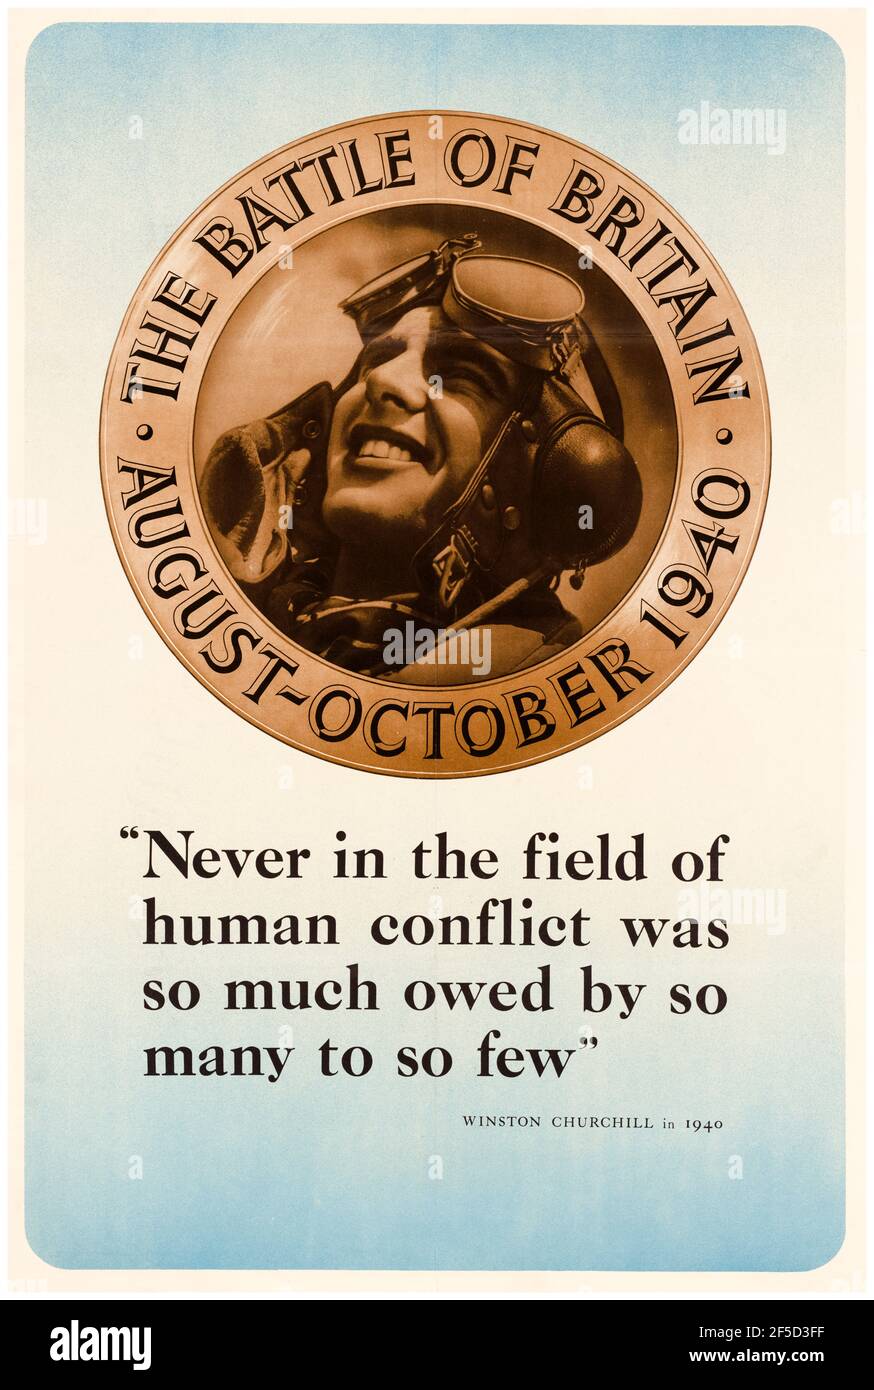 Battle of Britain, Winston Churchill quote, WW2 motivational poster, Never in the field of human conflict, was so much owed by so many, to so few, 1942-1945 Stock Photo